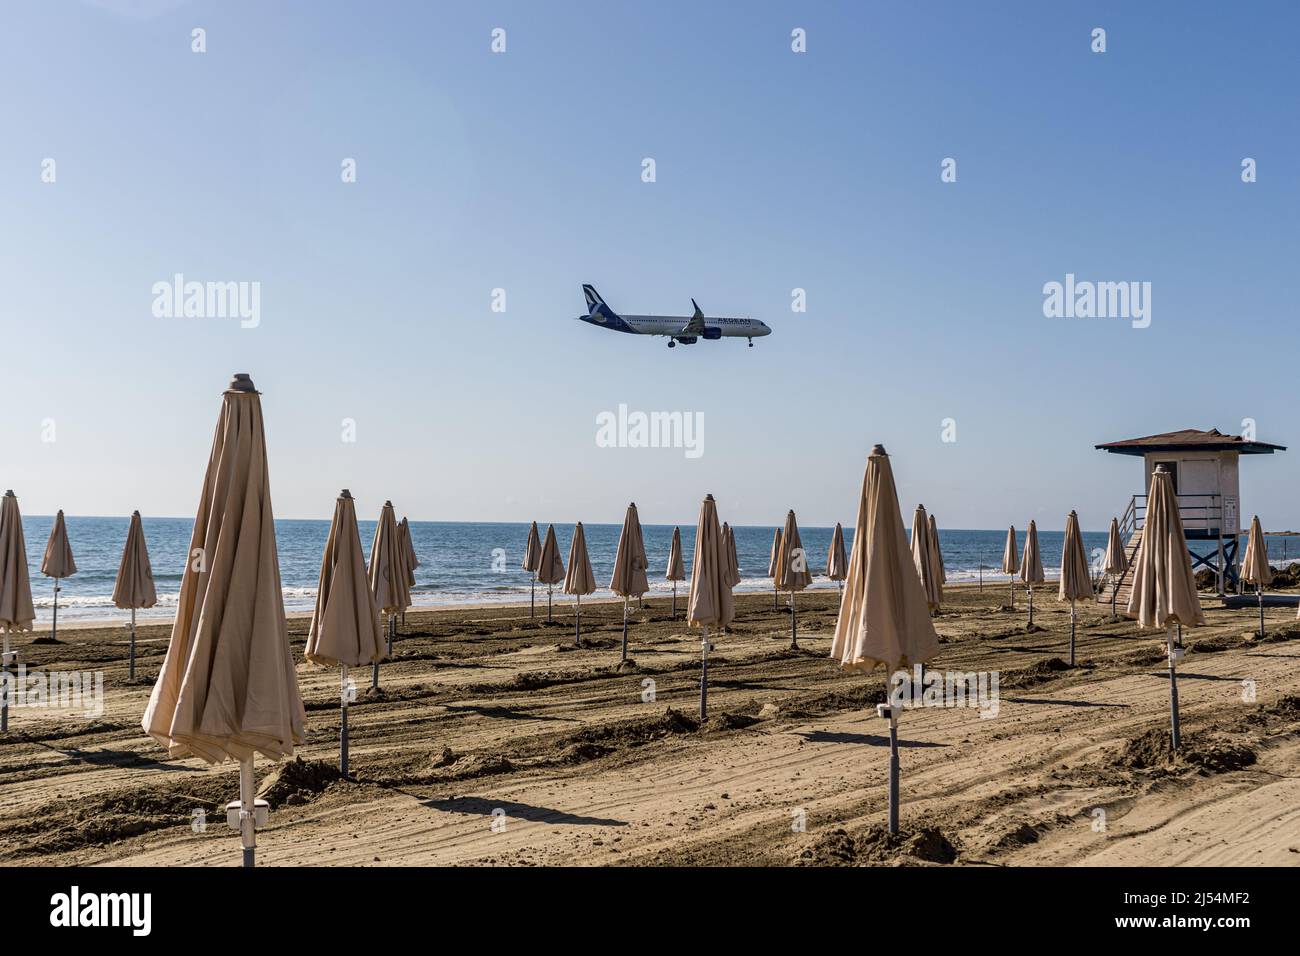 Larnaca, Cyprus. 20th Apr, 2022. A Aegean airlines plane is landing at Larnaca International airport as seen from Mackenzie Beach, Larnaca, Cyprus, on Apr. 20, 2022. The government of Cyprus is considering approaching new tourist markets in order to cover the gap left in the tourist industry by the situation in Ukraine. The Russian and Ukrainian tourists form up to 25% of the Cypriot tourist market. (Photo by Kostas Pikoulas/Sipa USA). Credit: Sipa USA/Alamy Live News Stock Photo